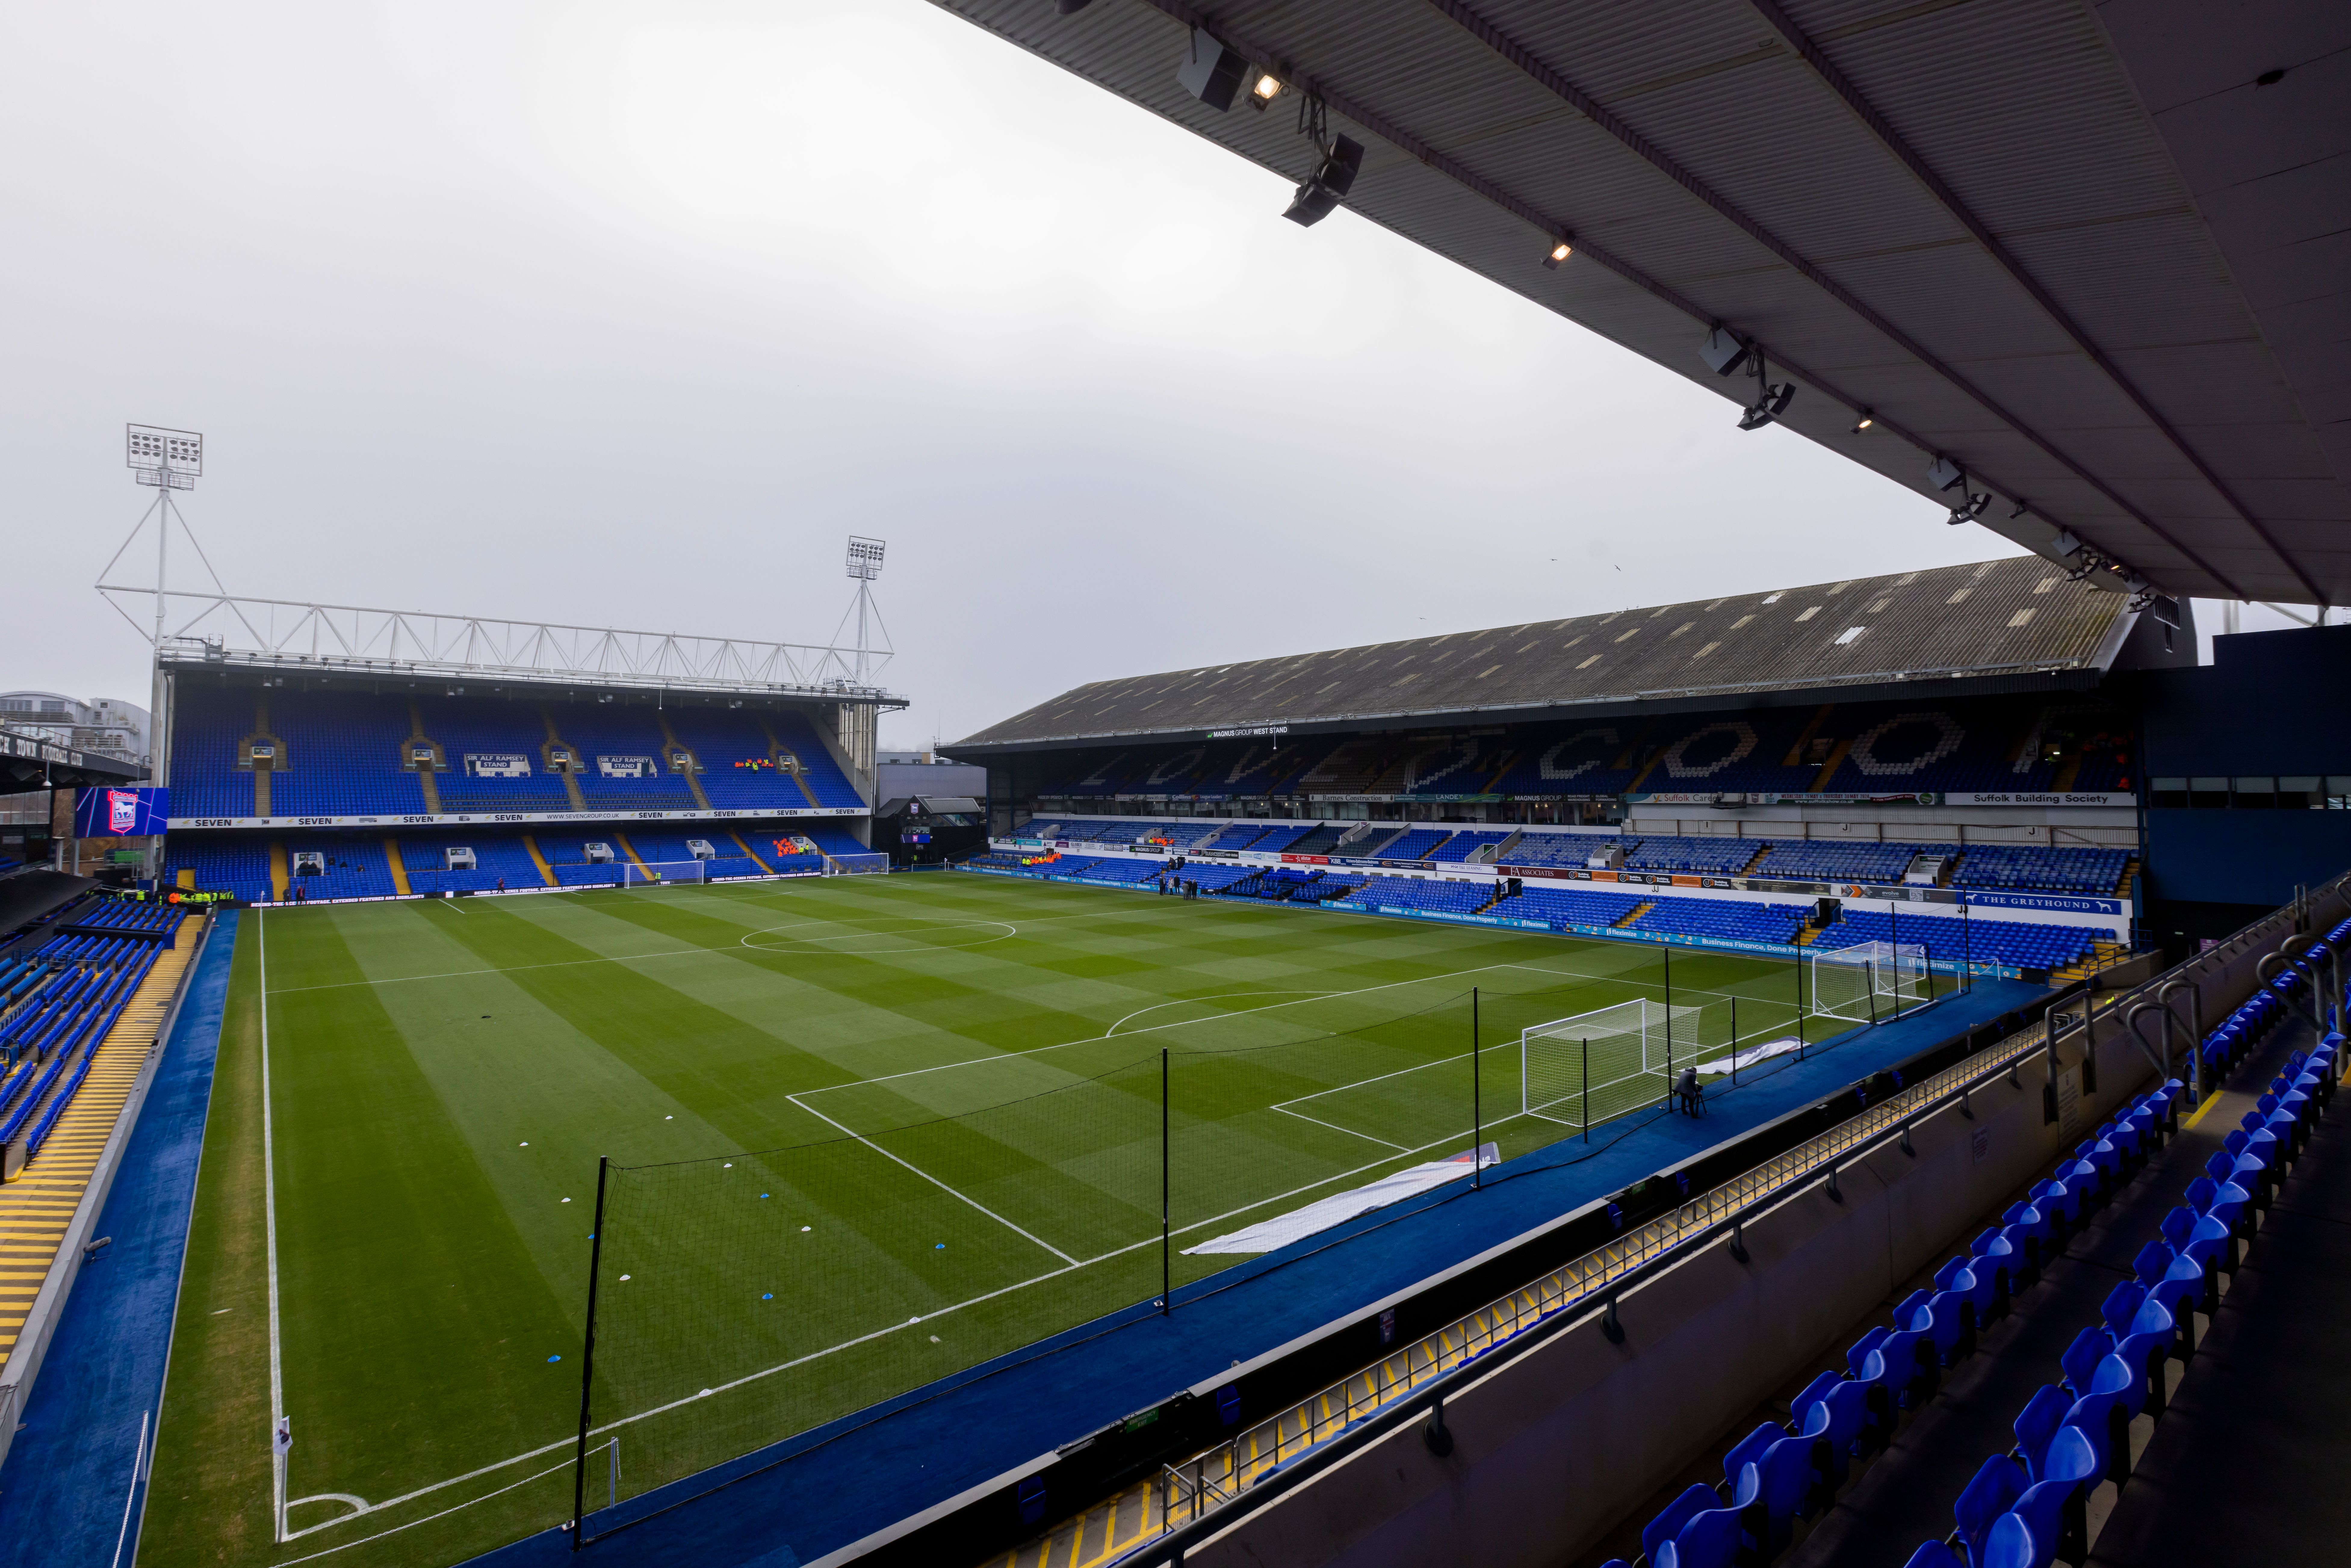 A general view of Ipswich Town's Portman Road